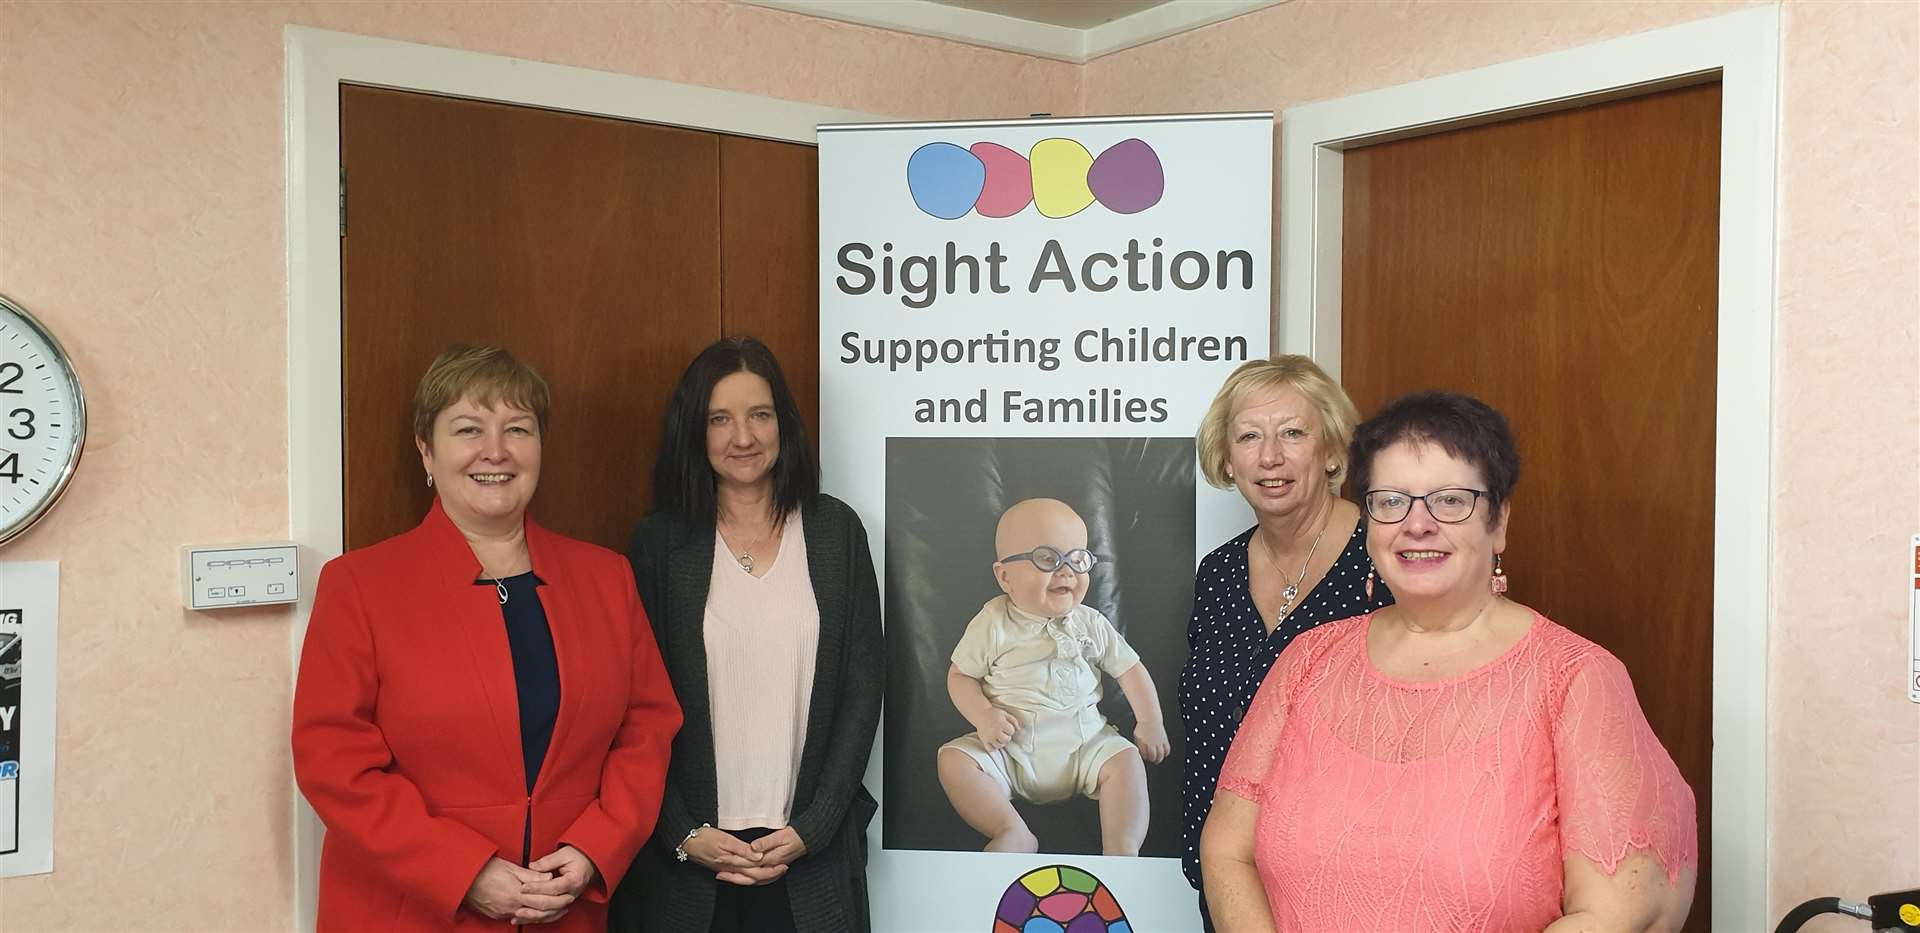 Rhoda Grant MSP, Helen Besent (Visual Impairment Support Assistant), Gillian Mitchell (Executive Manager), Mary Munro (Admin Officer).